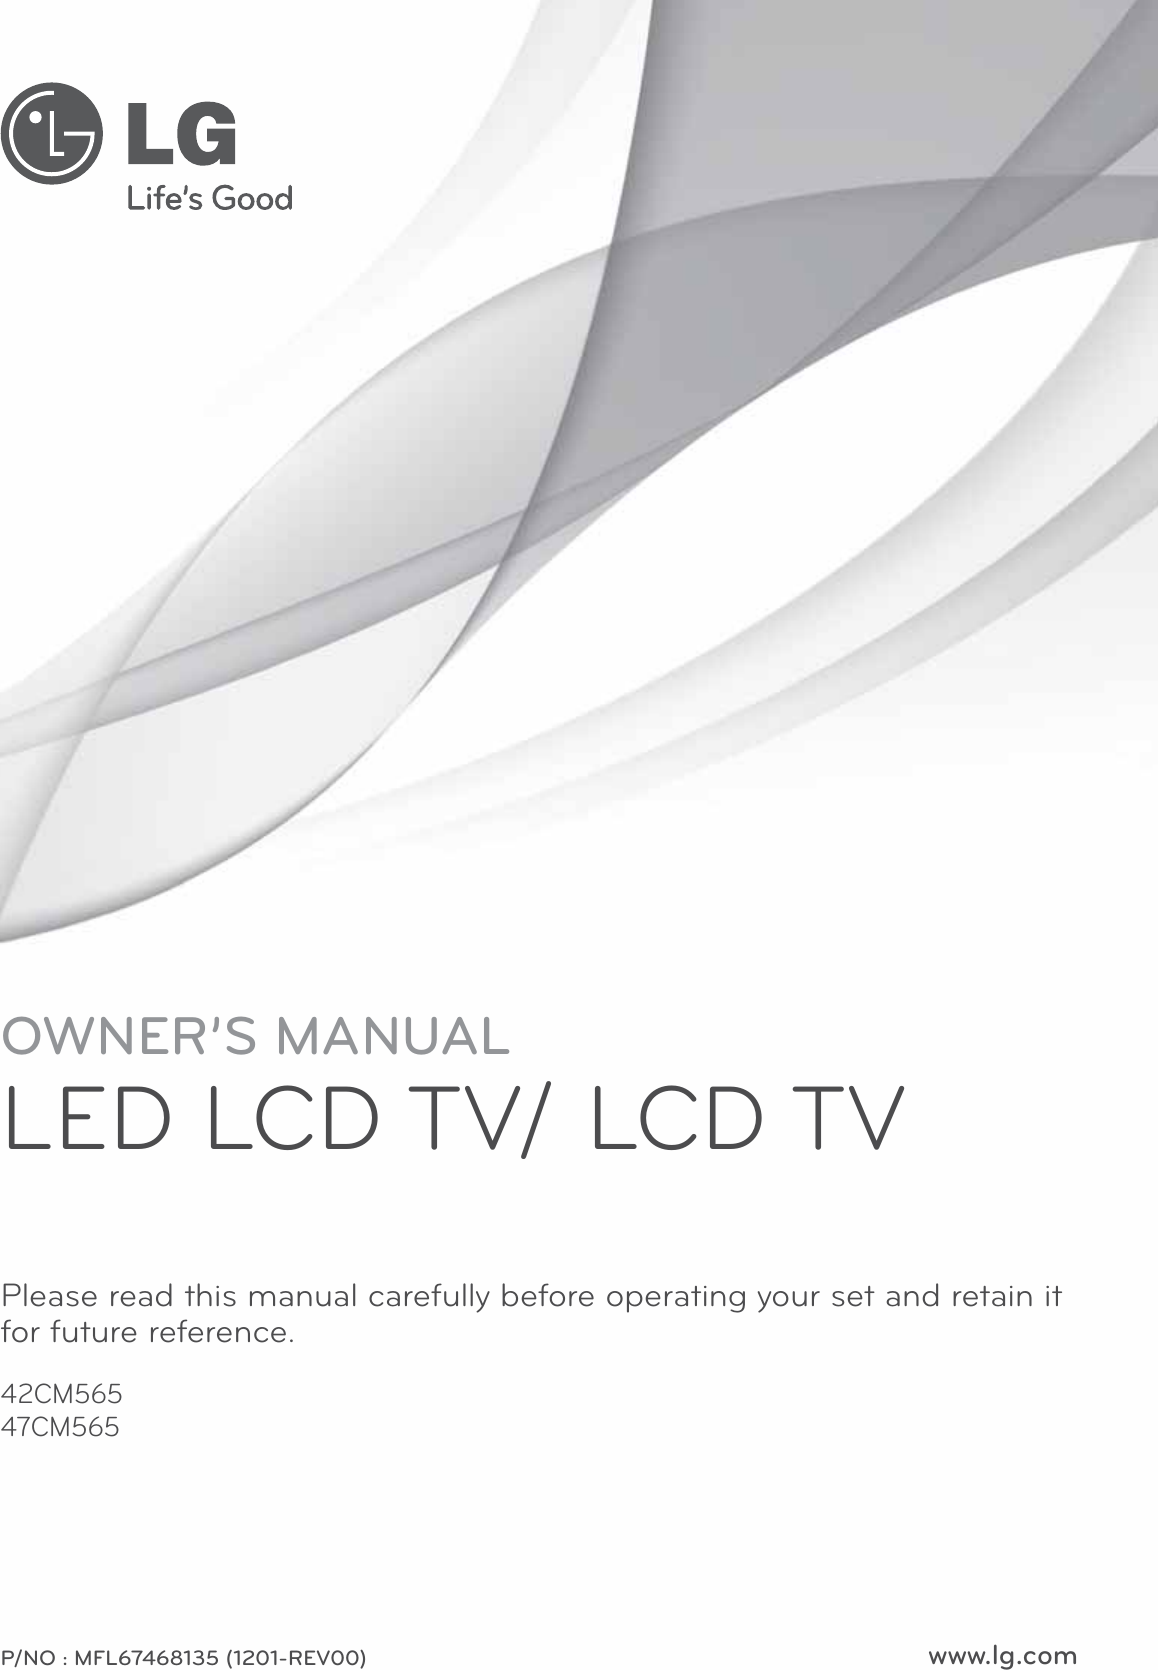 www.lg.comOWNER’S MANUALLED LCD TV/ LCD TVPlease read this manual carefully before operating your set and retain it for future reference.42CM56547CM565P/NO : MFL67468135 (1201-REV00)